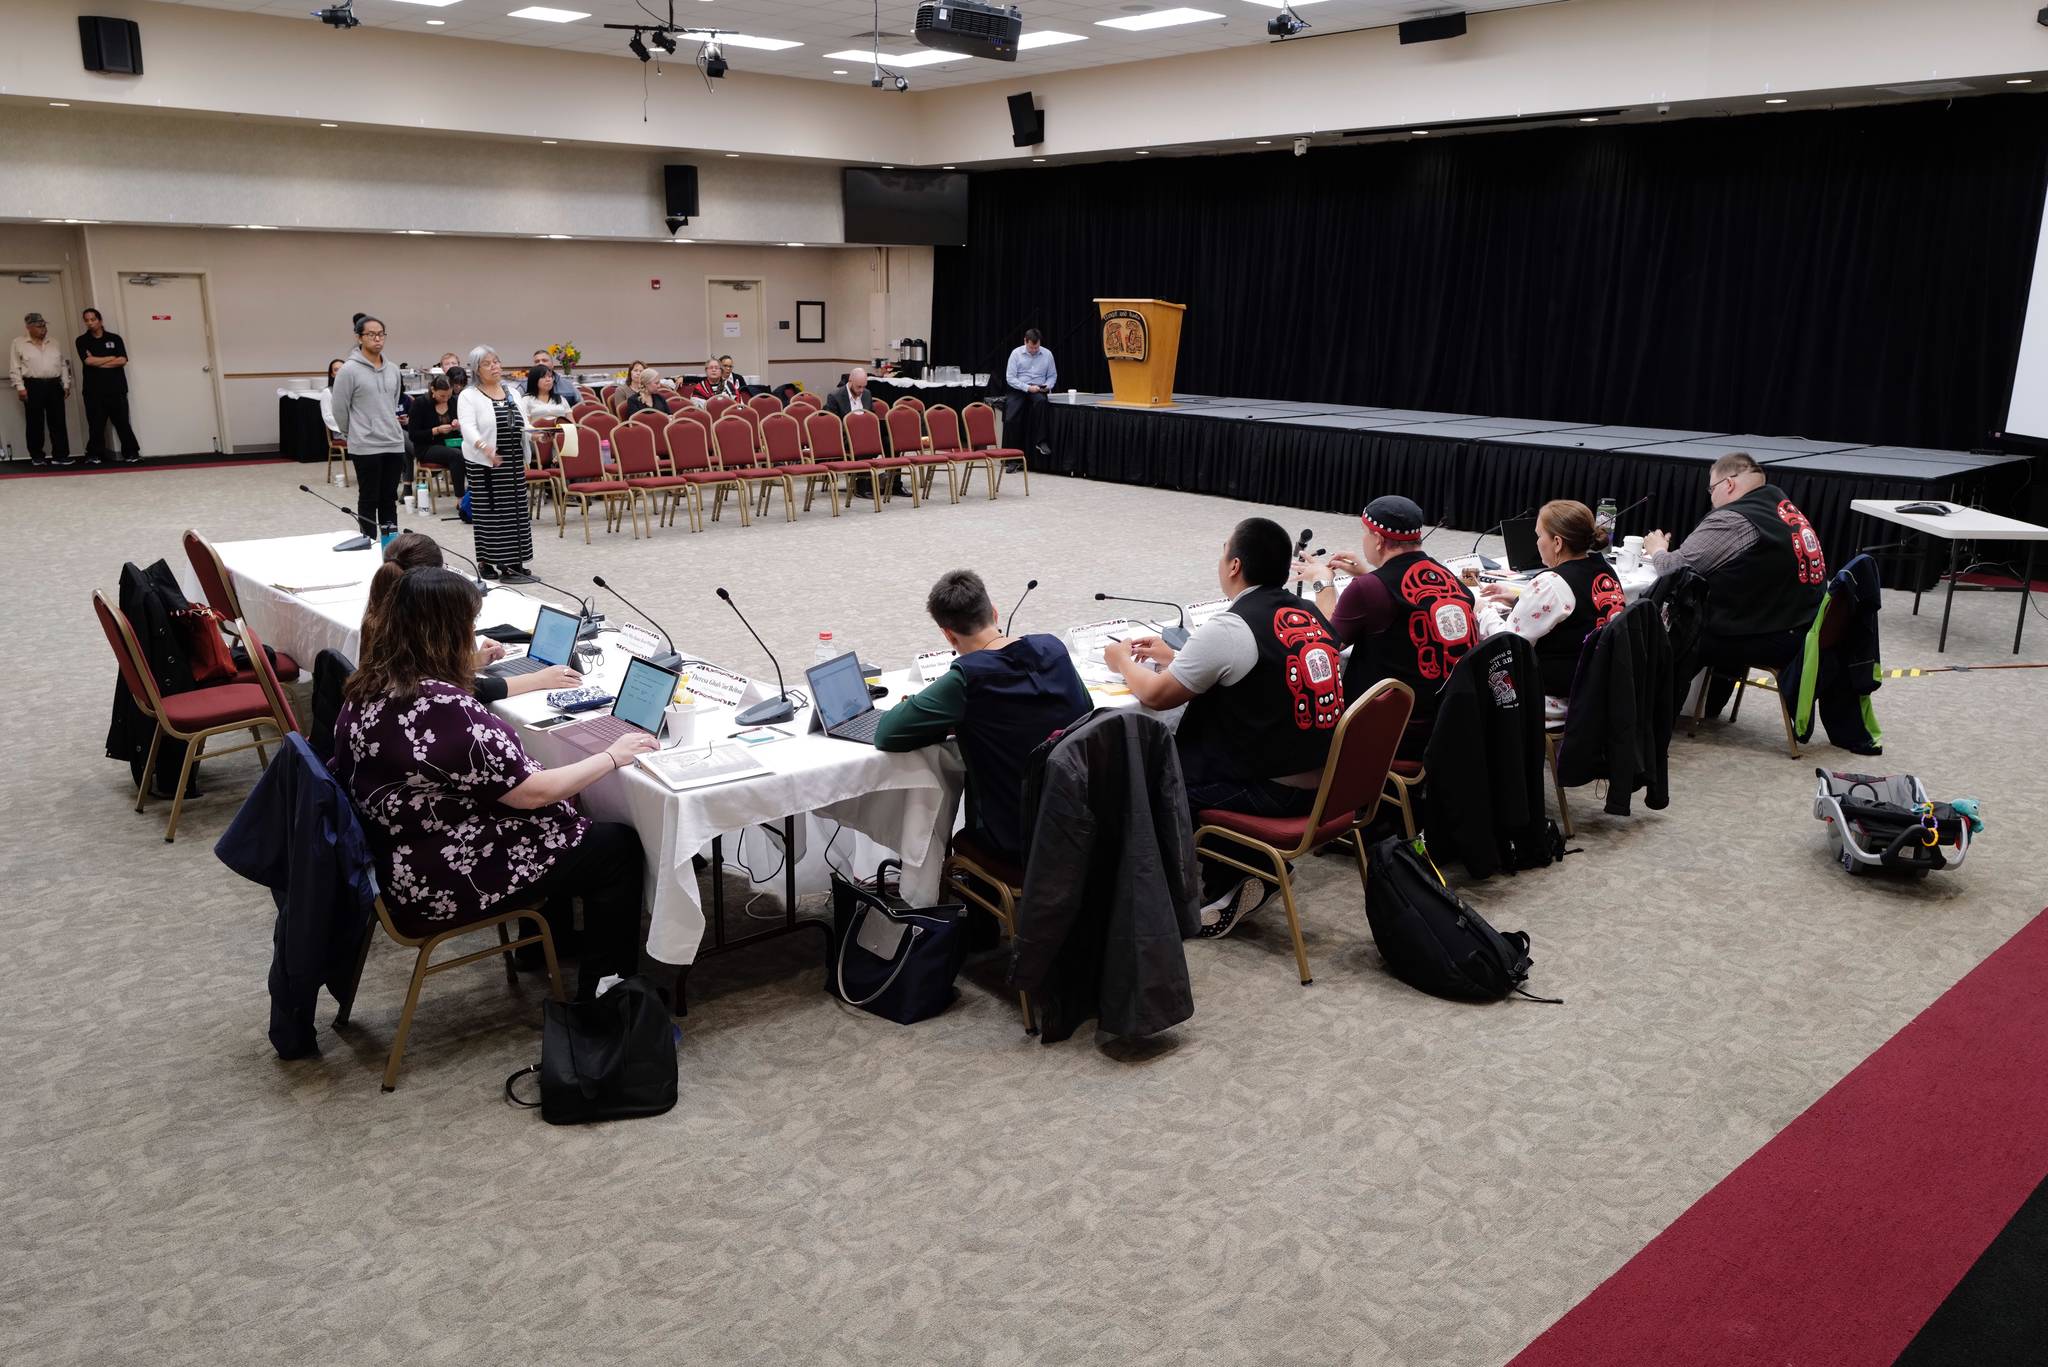 Members of the Central Council of Tlingit and Haida Indian Tribes of Alaska listen to public comments during an Executive Council meeting at the Elizabeth Peratrovich Hall on Thursday, July 18, 2019. (Michael Penn | Juneau Empire)